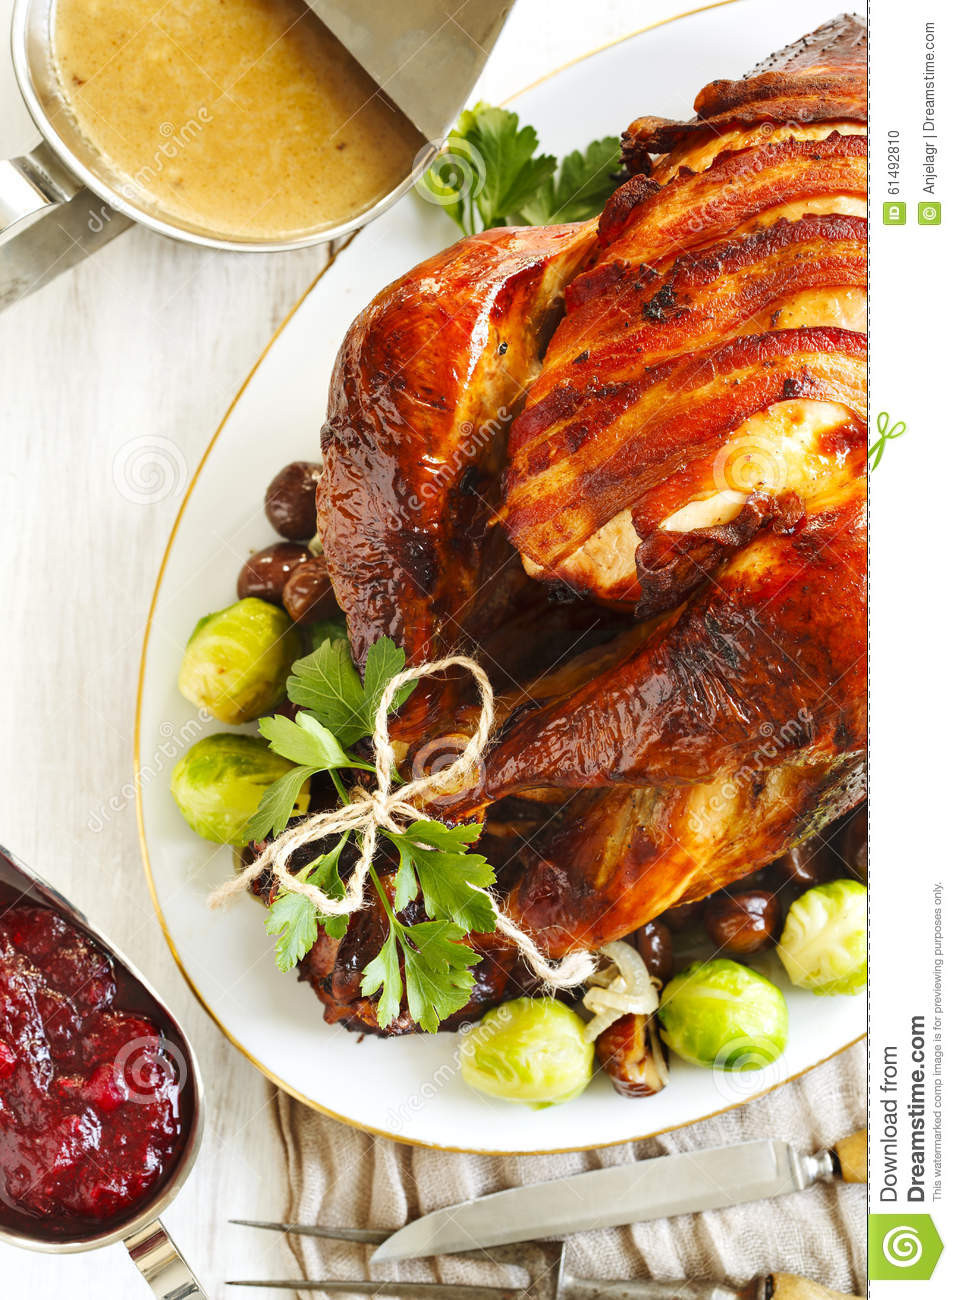 Prepared Turkey Dinners For Thanksgiving
 Roasted Turkey With Bacon And Garnished With Chestnuts And